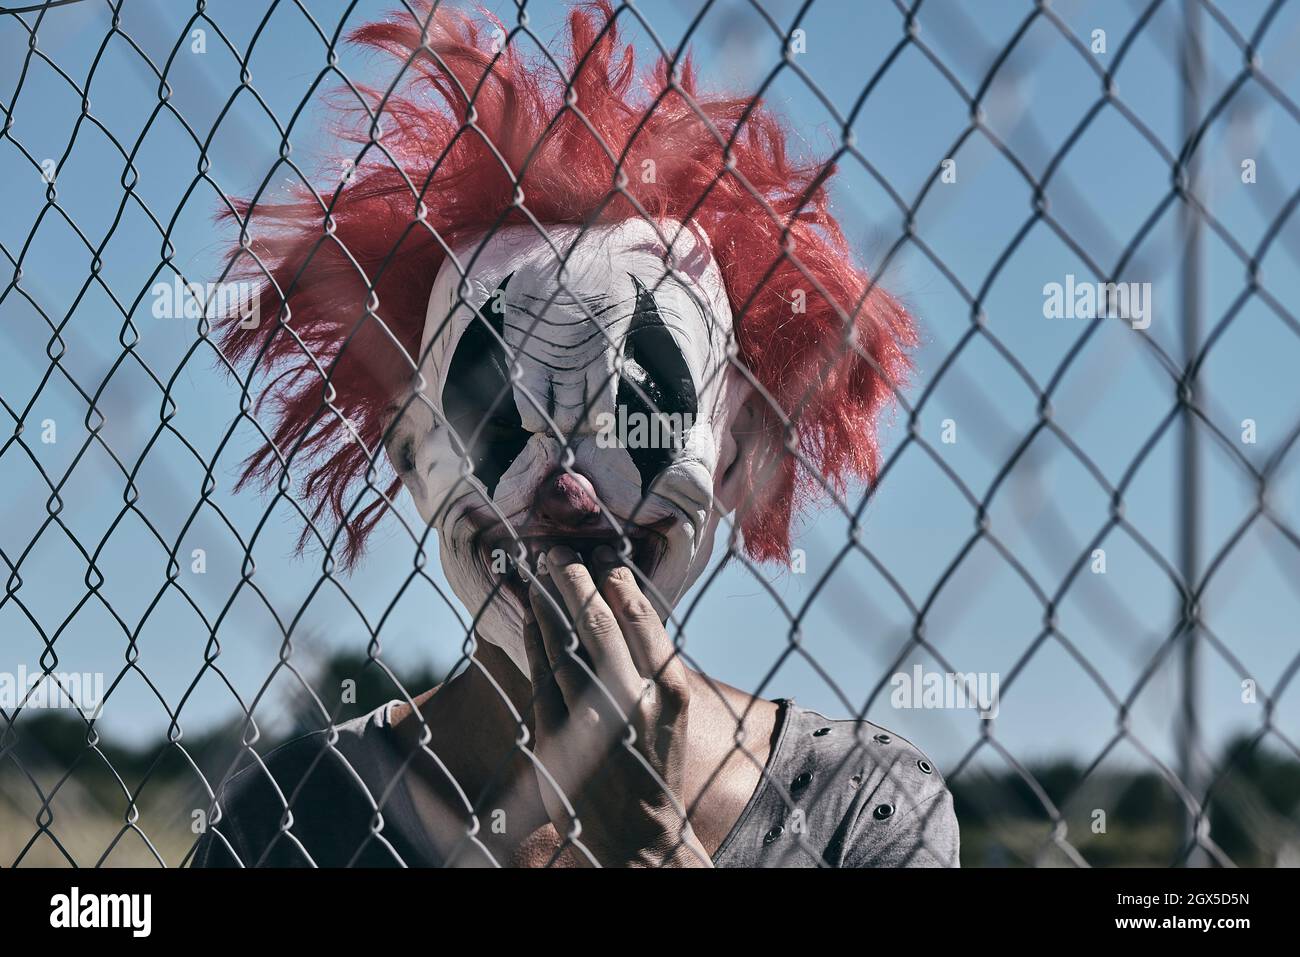 closeup of a scary evil clown, with his hand in his mouth, staring at the observer through a chain-link fence outdoors Stock Photo